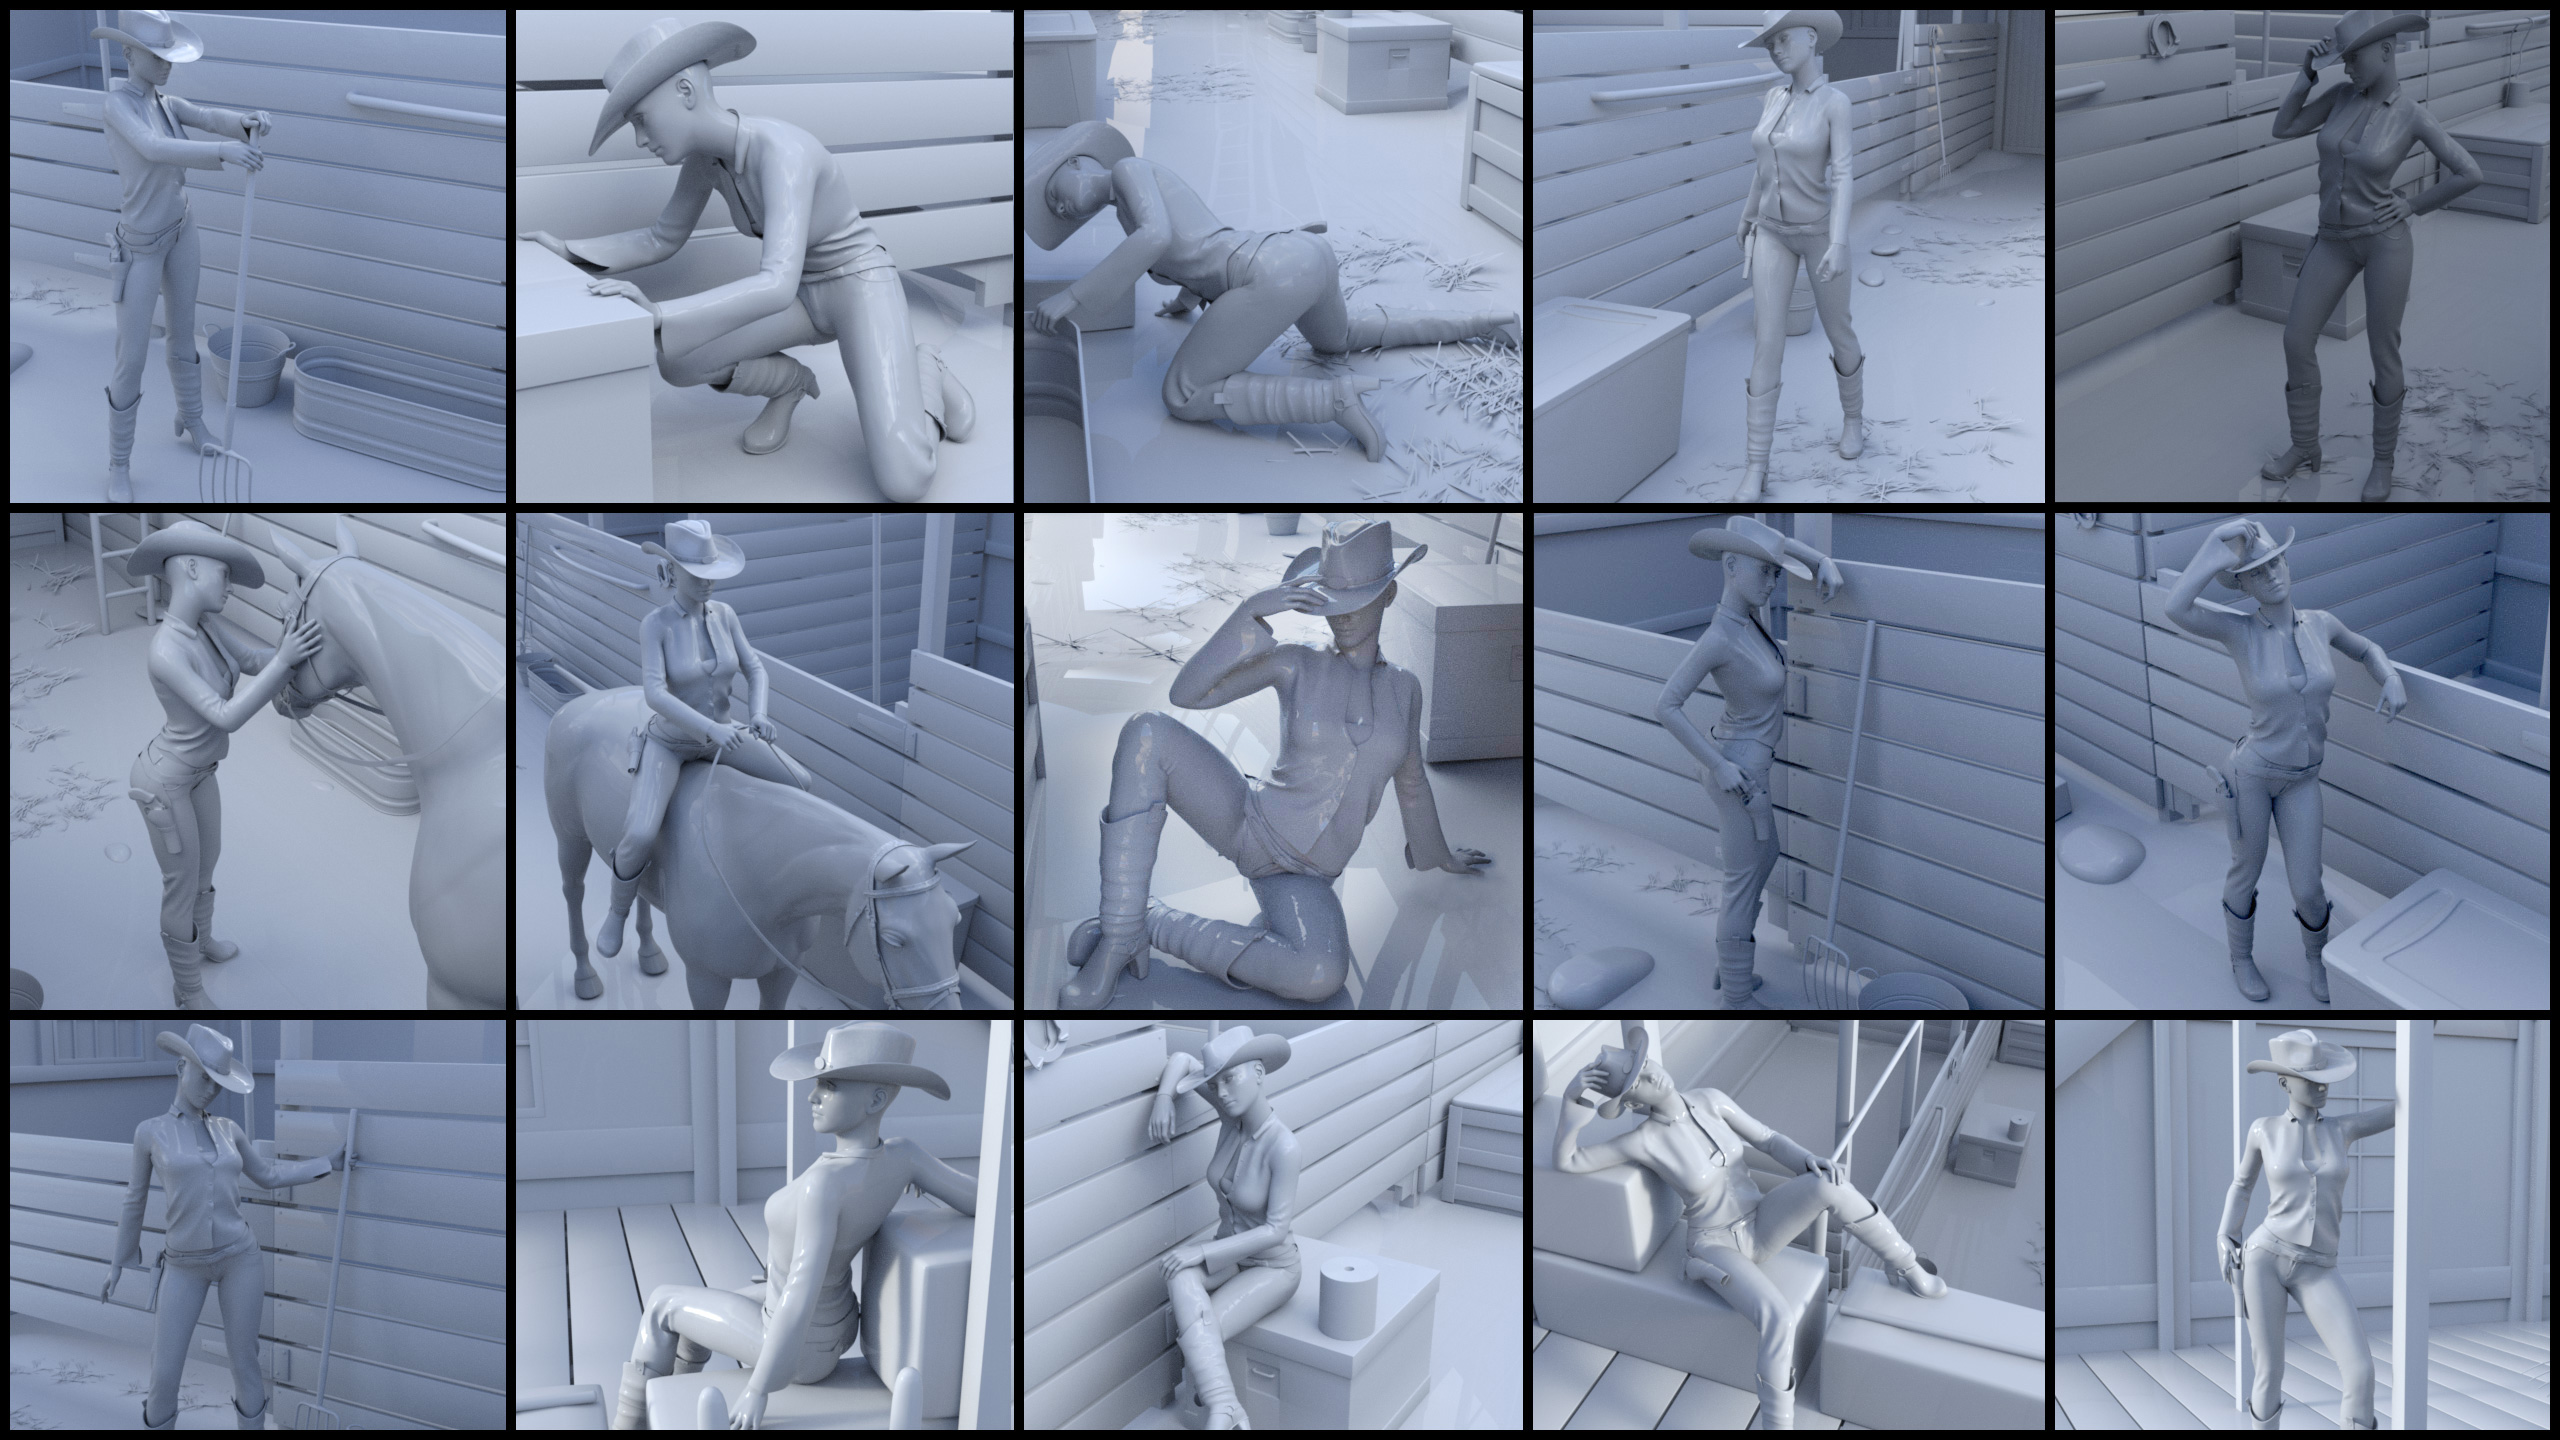 i13 Modern Barn Poses by: ironman13, 3D Models by Daz 3D